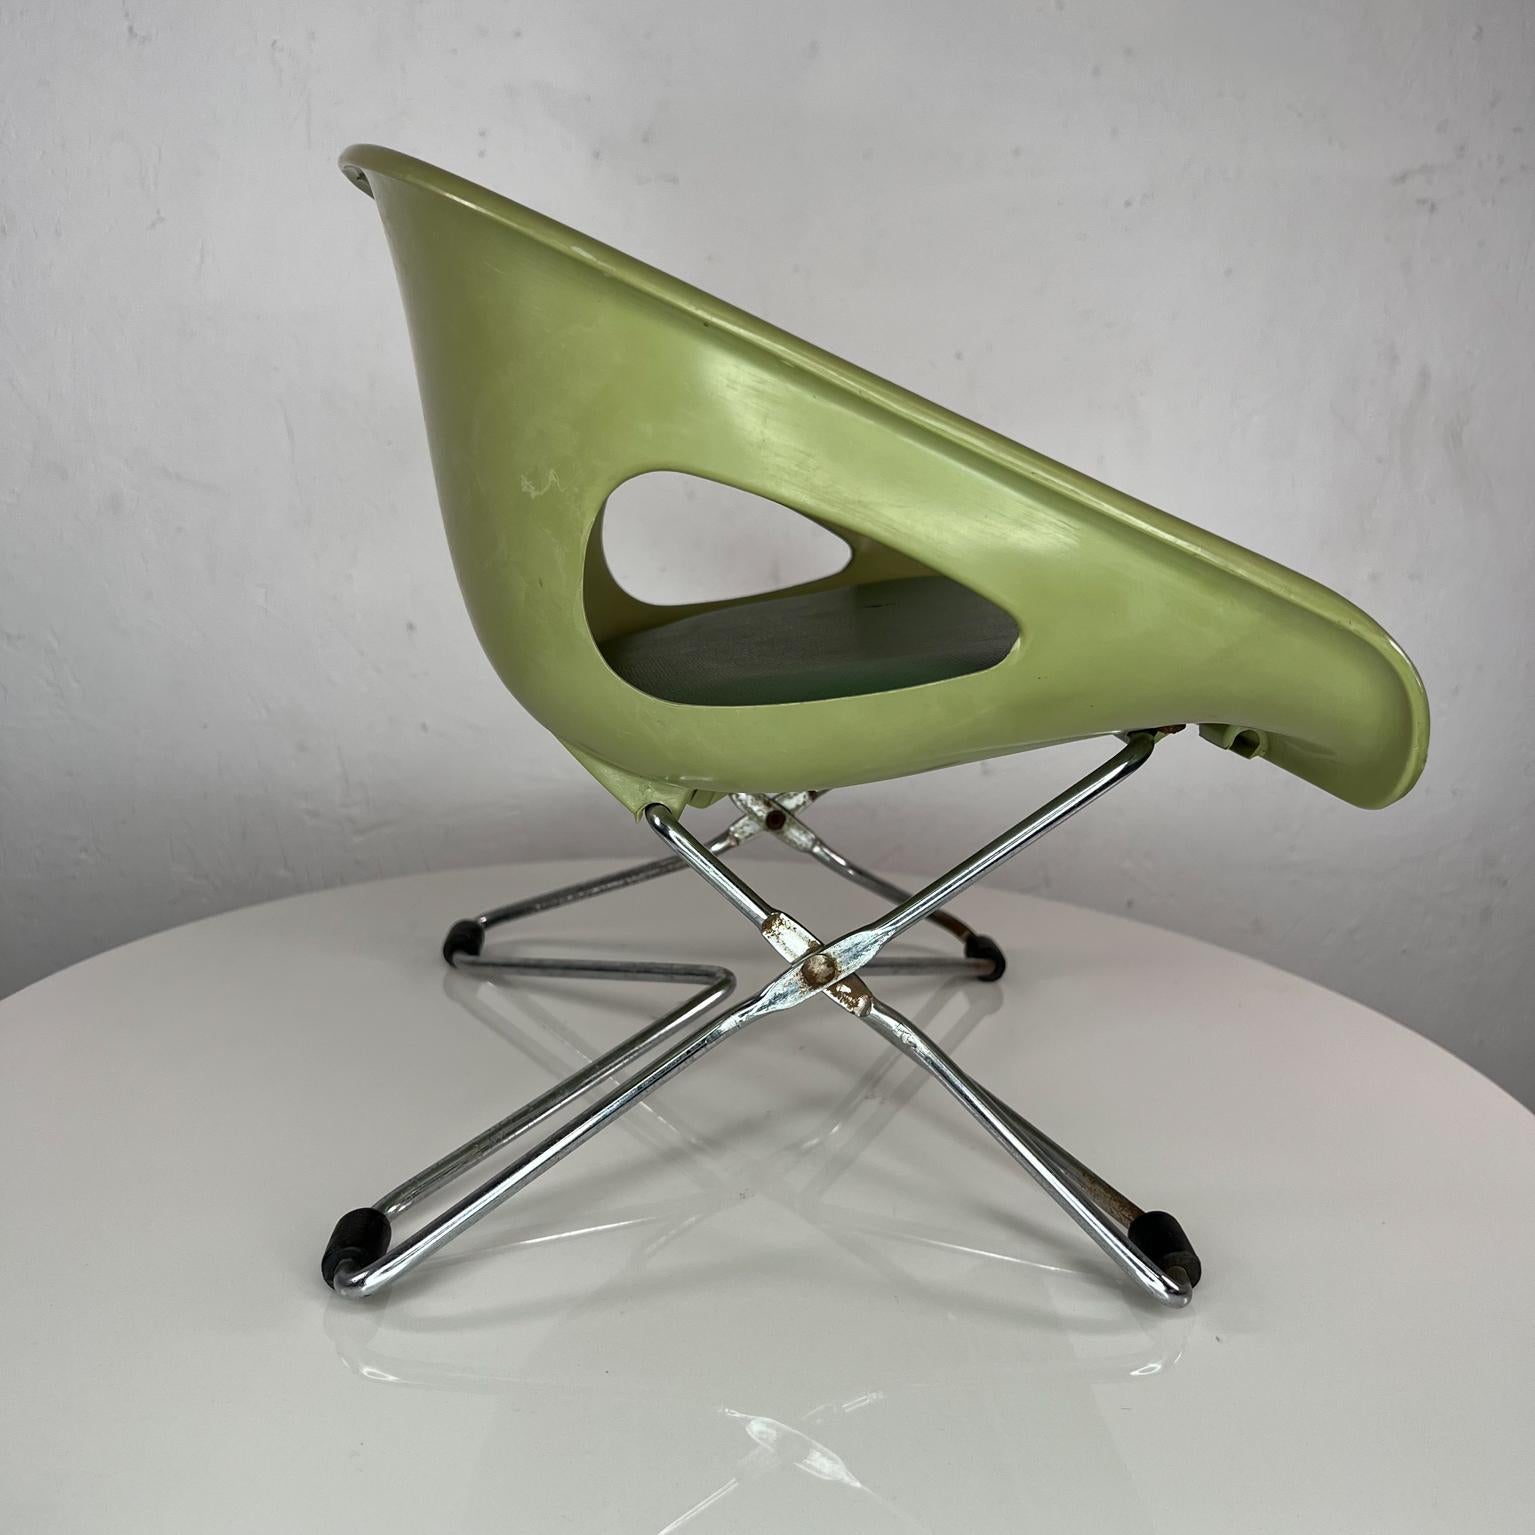 American 1960s Mid Century Child's Booster Seat Chair Avocado Green by Cosco Indiana